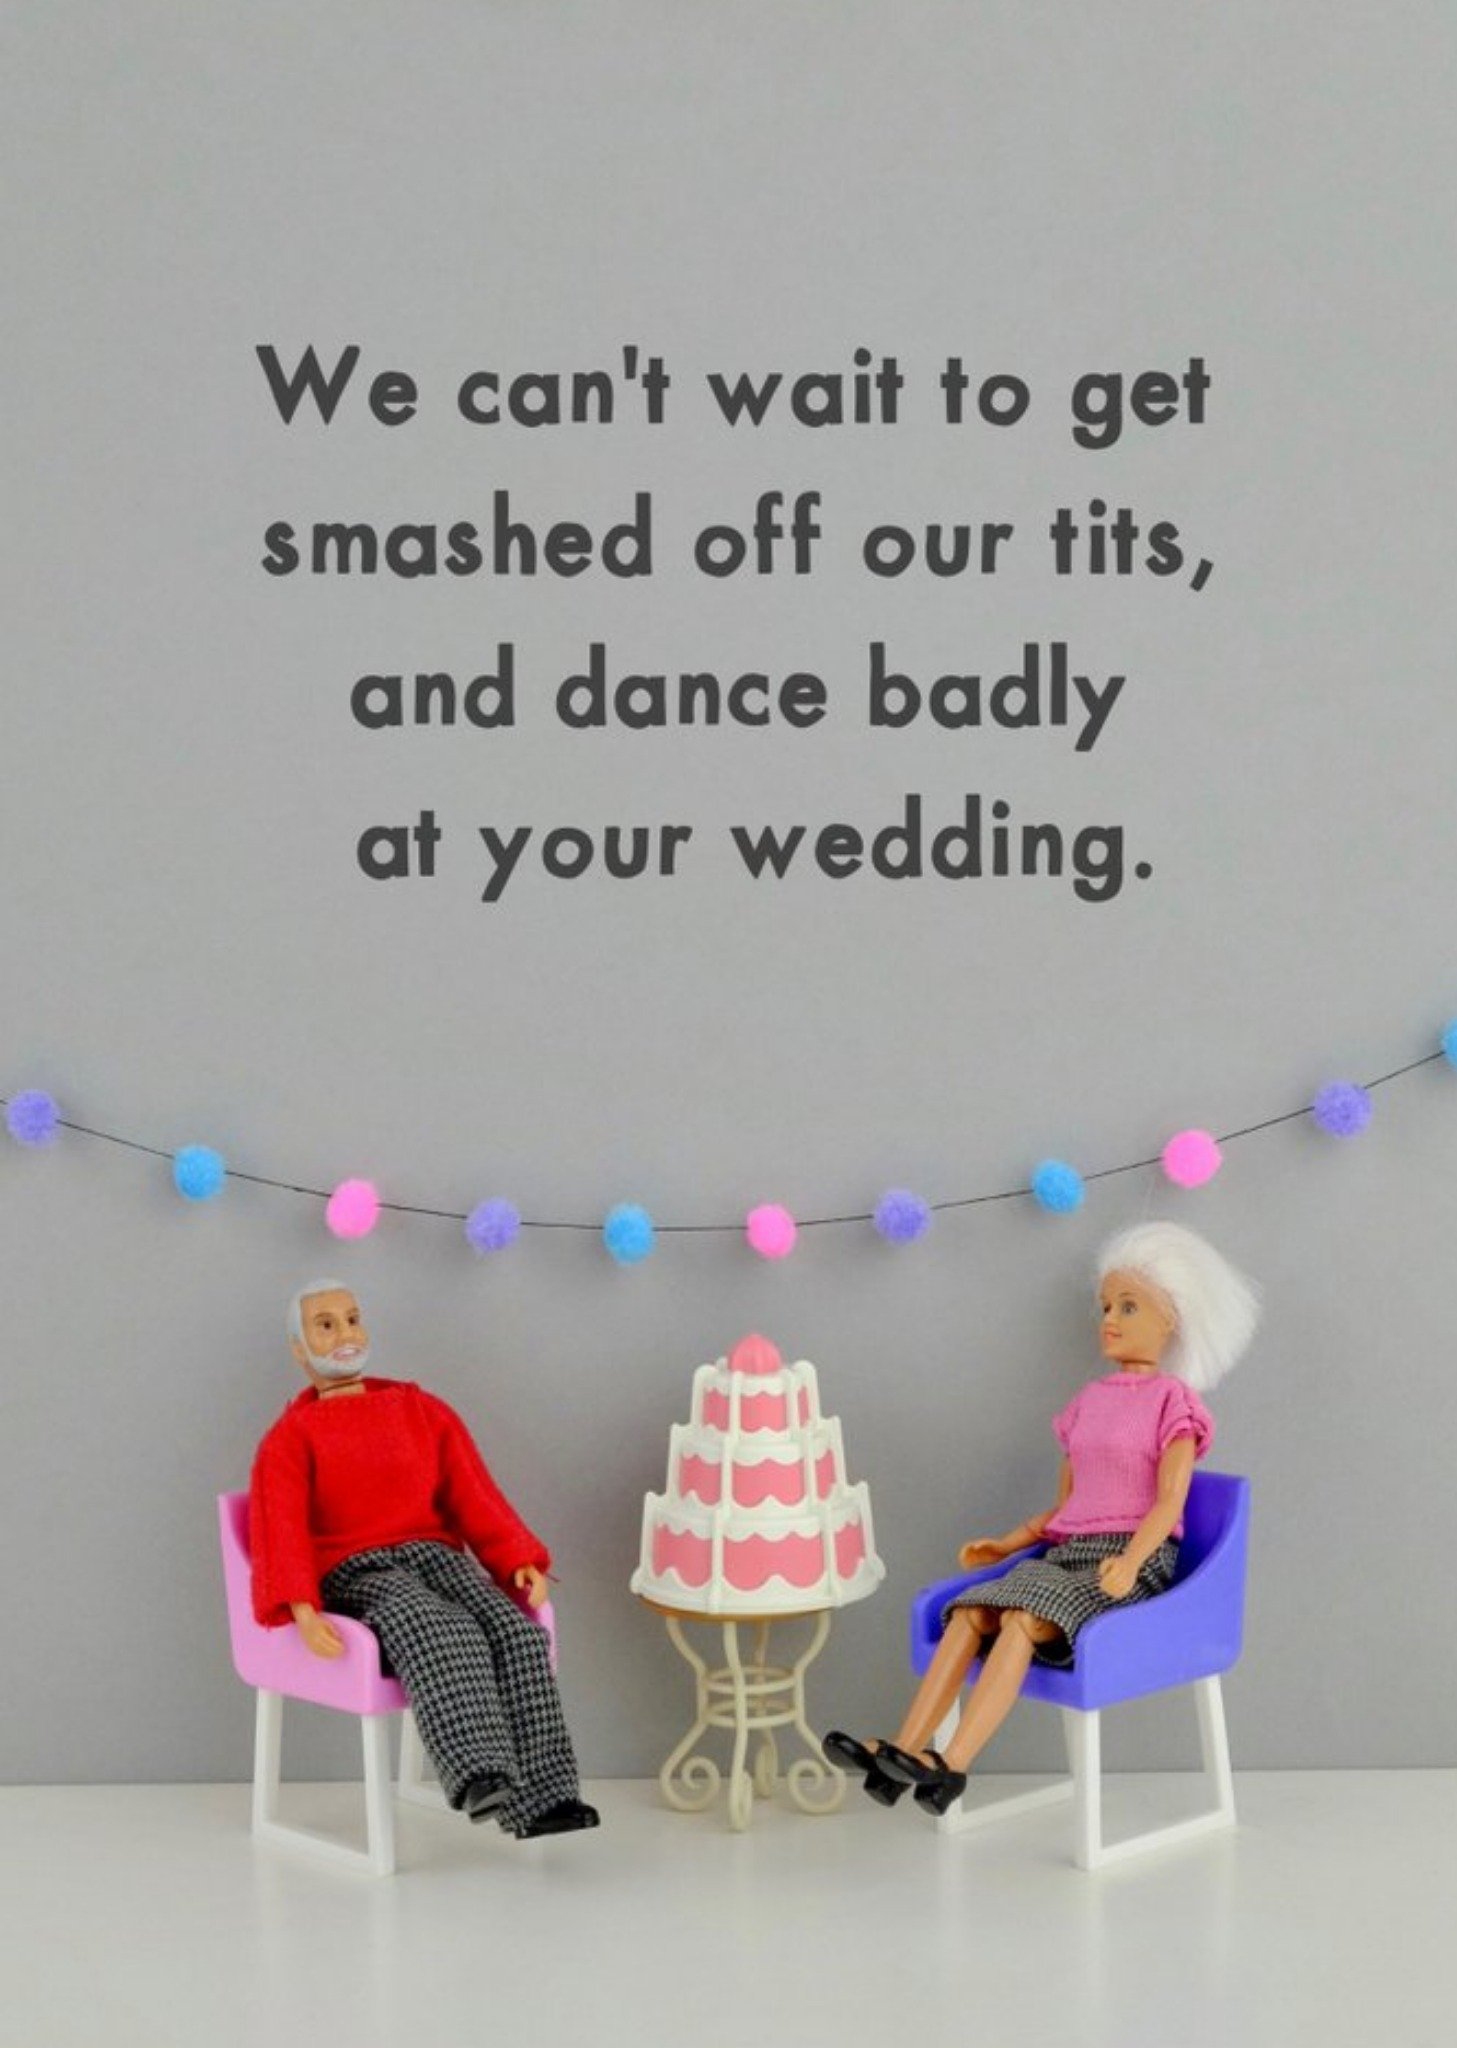 Bold And Bright Funny Rude We Cant Wait To Get Smashed Our Tits At Your Wedding Card, Large